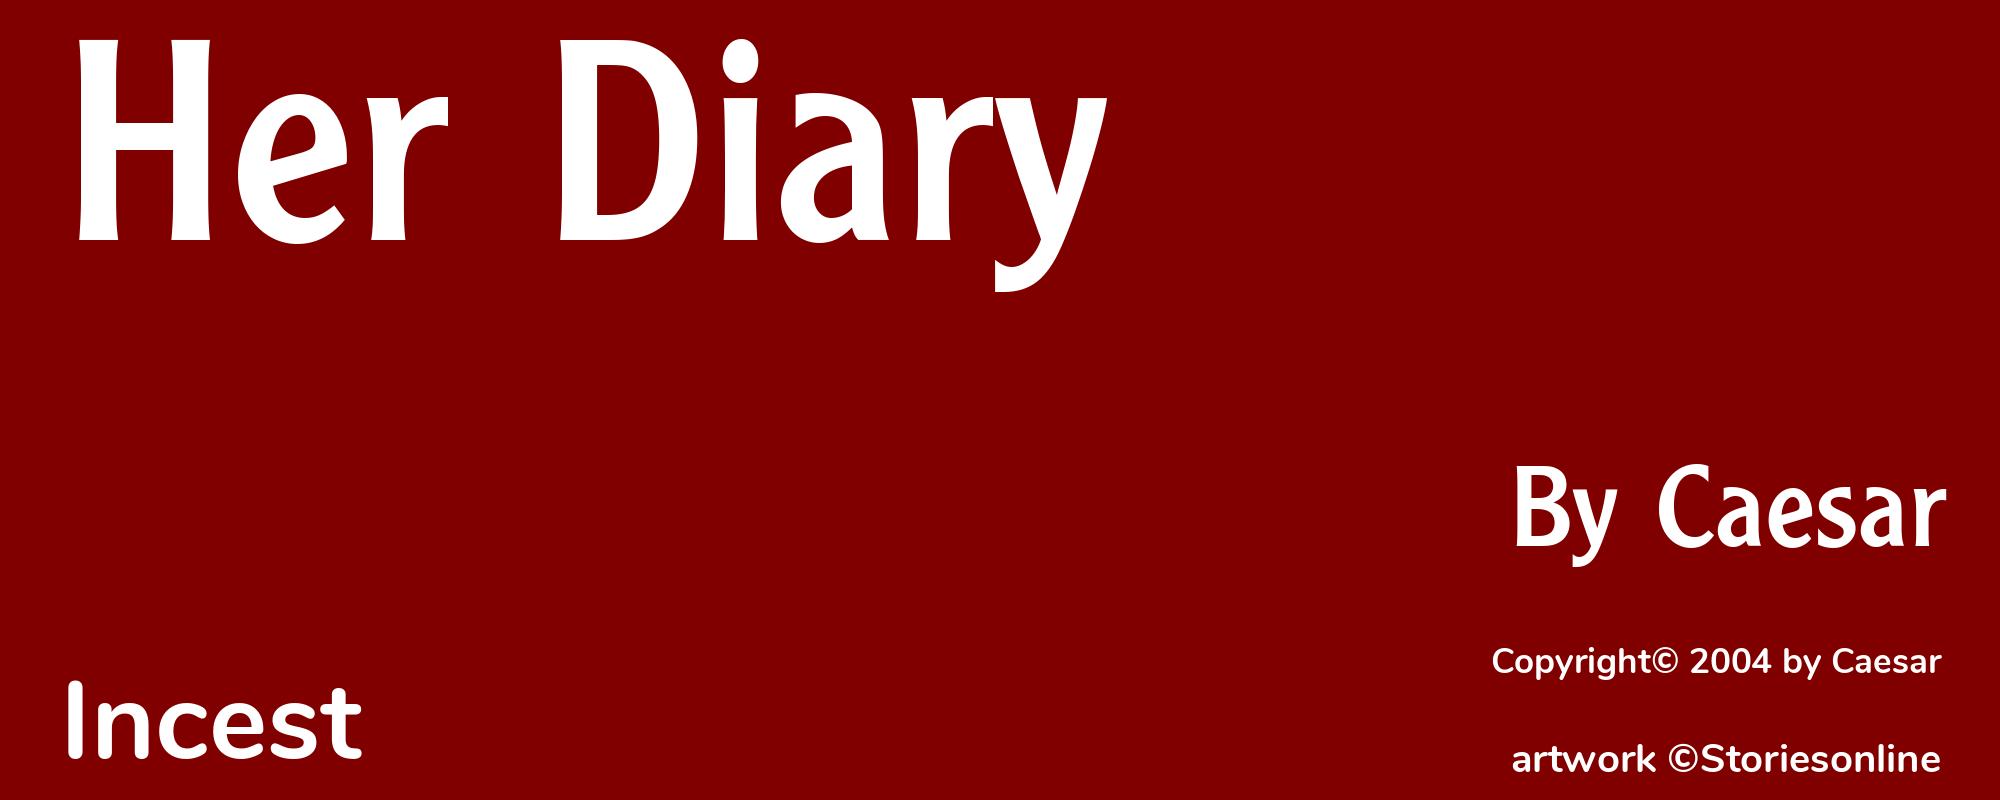 Her Diary - Cover